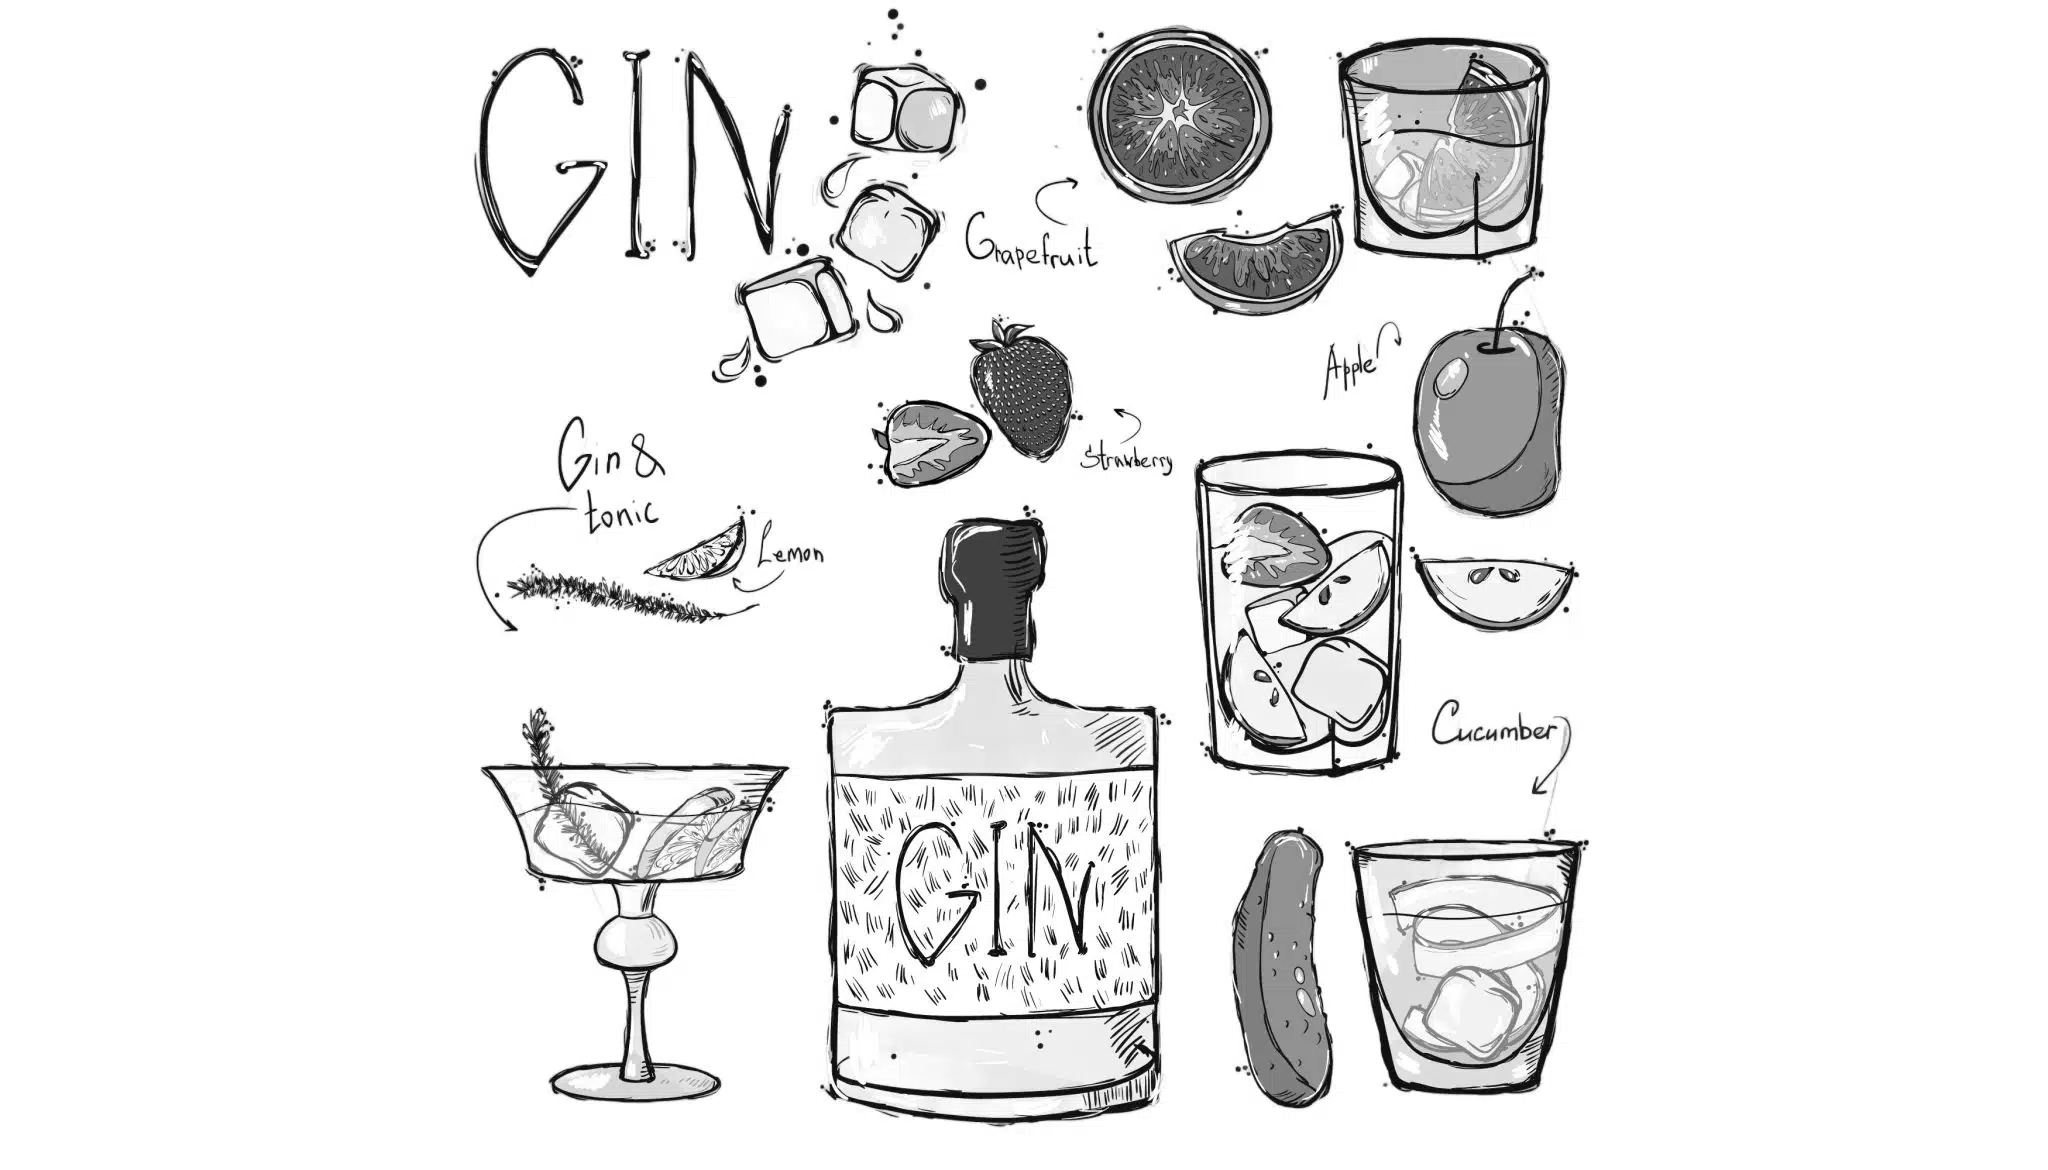 A sketch of gin and mixers: a gin bottle, ice cubes, grapefruit, apple, strawberry, lemon, glasses of drinks, and a gin & tonic.